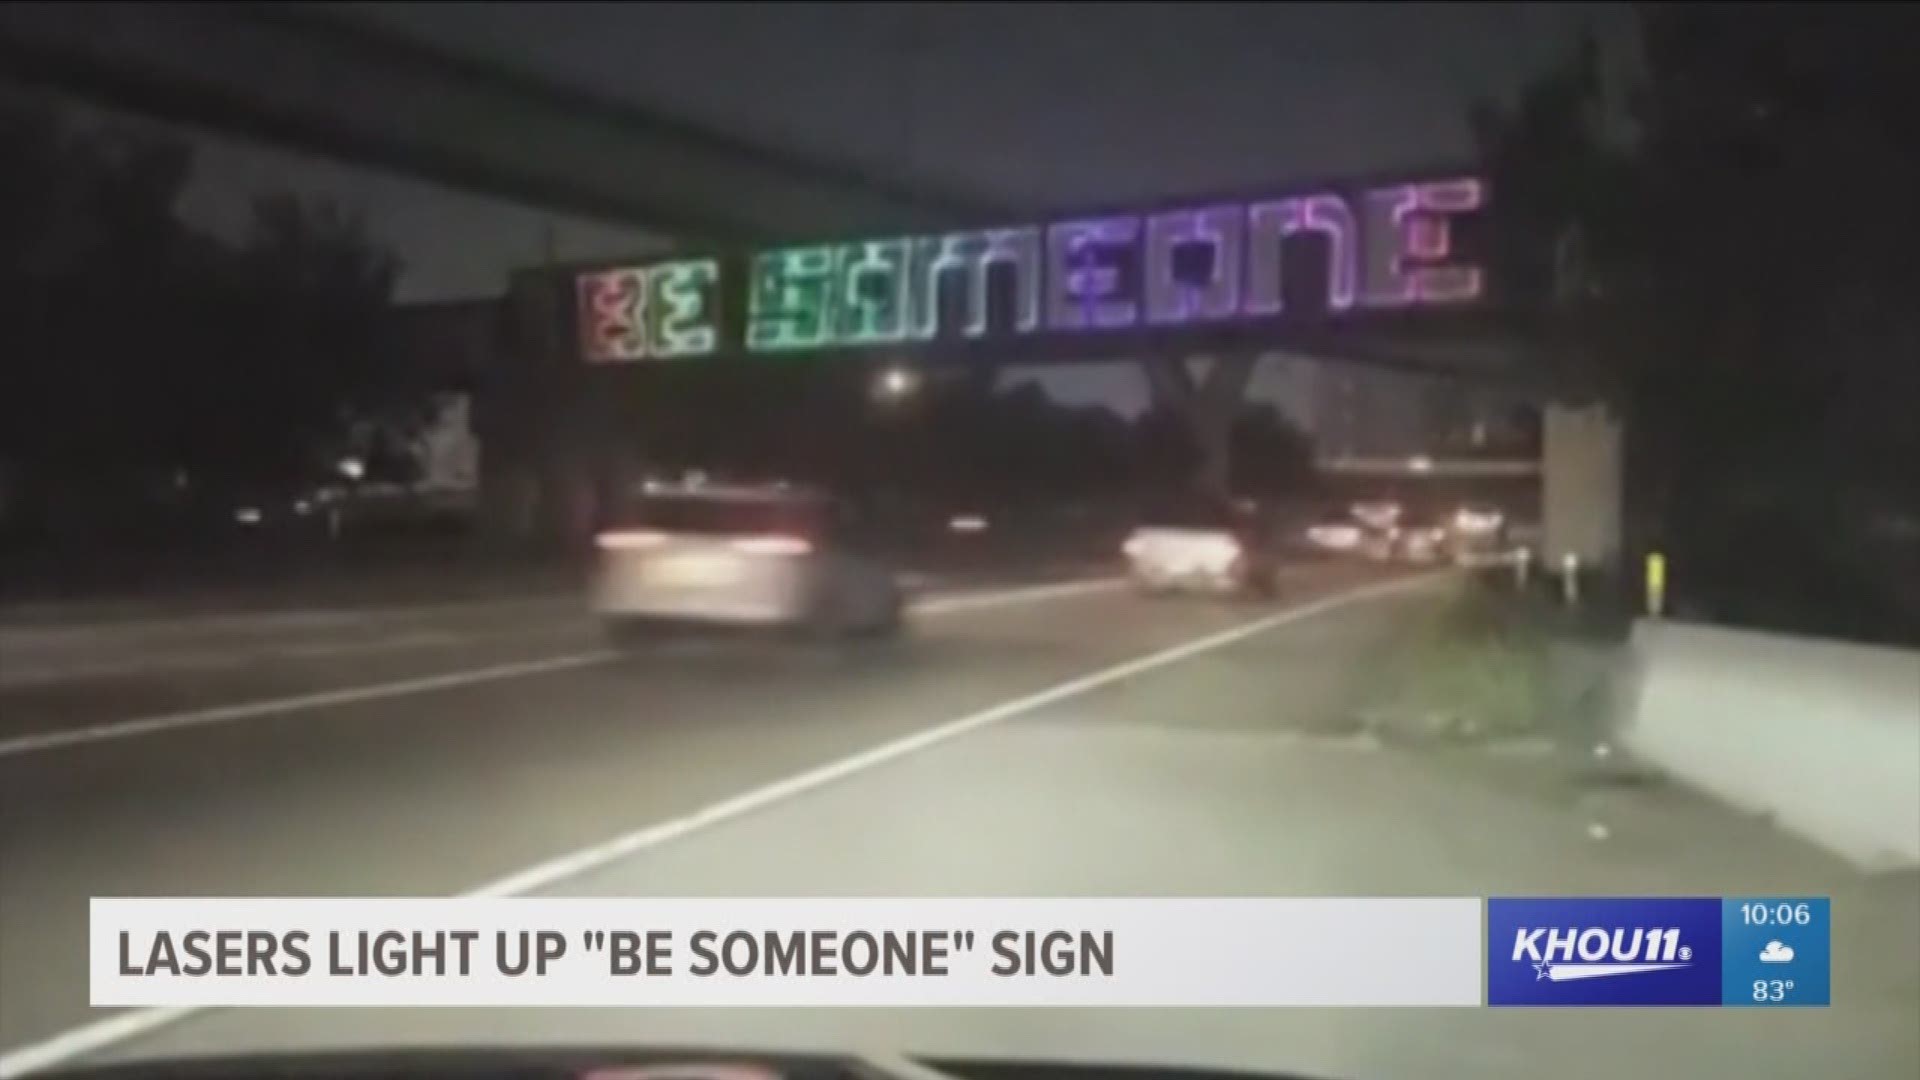 The famous "Be Someone" sign over I-45 got a high-tech makeover. A company called JD3 Lasers used laser control software to light up the landmark graffiti. 